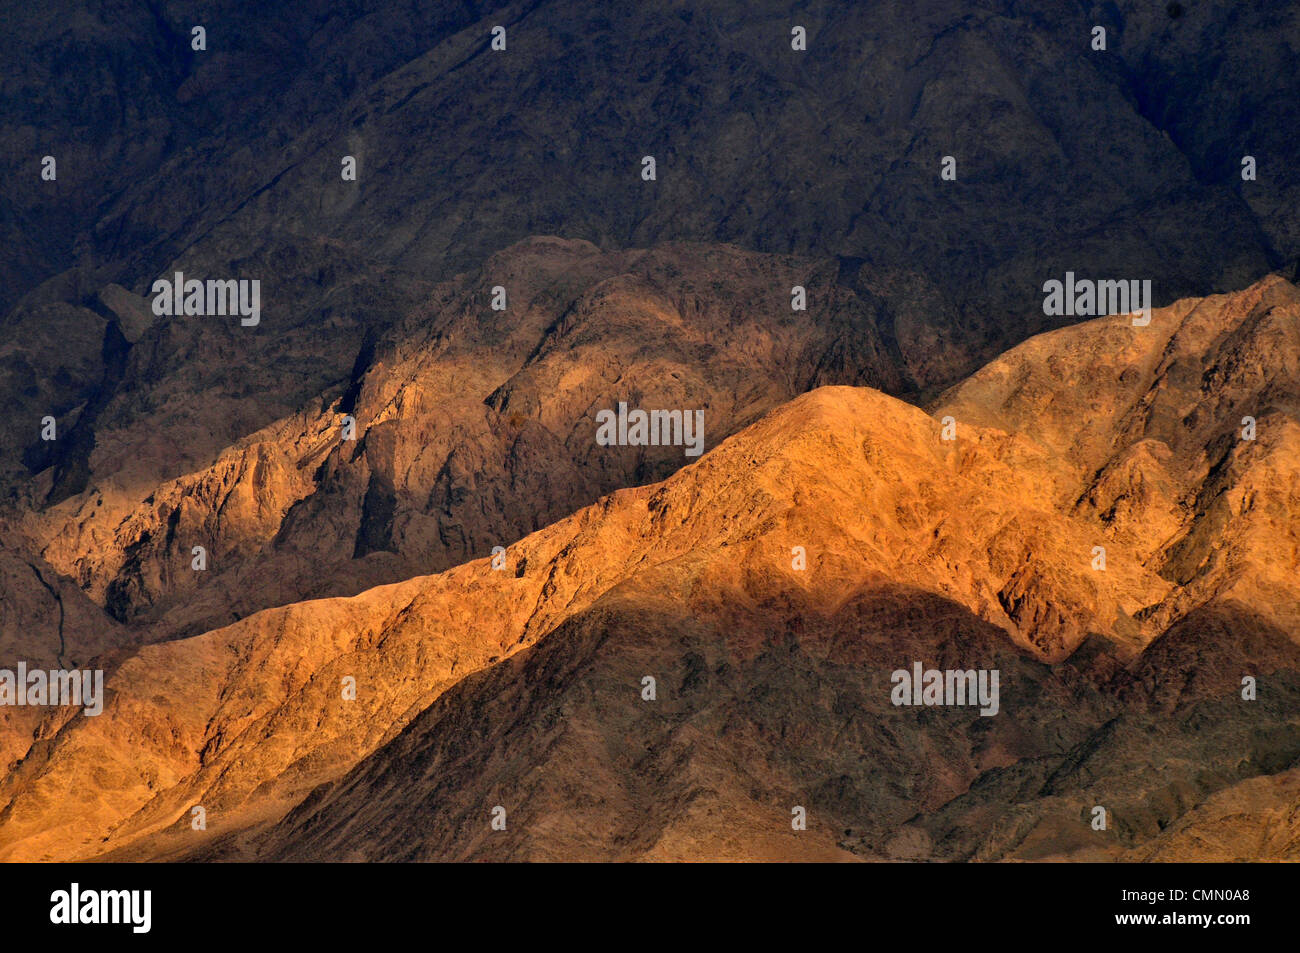 Desert view of magmatic mountain rock in the Edom mountains of Jordan. Stock Photo